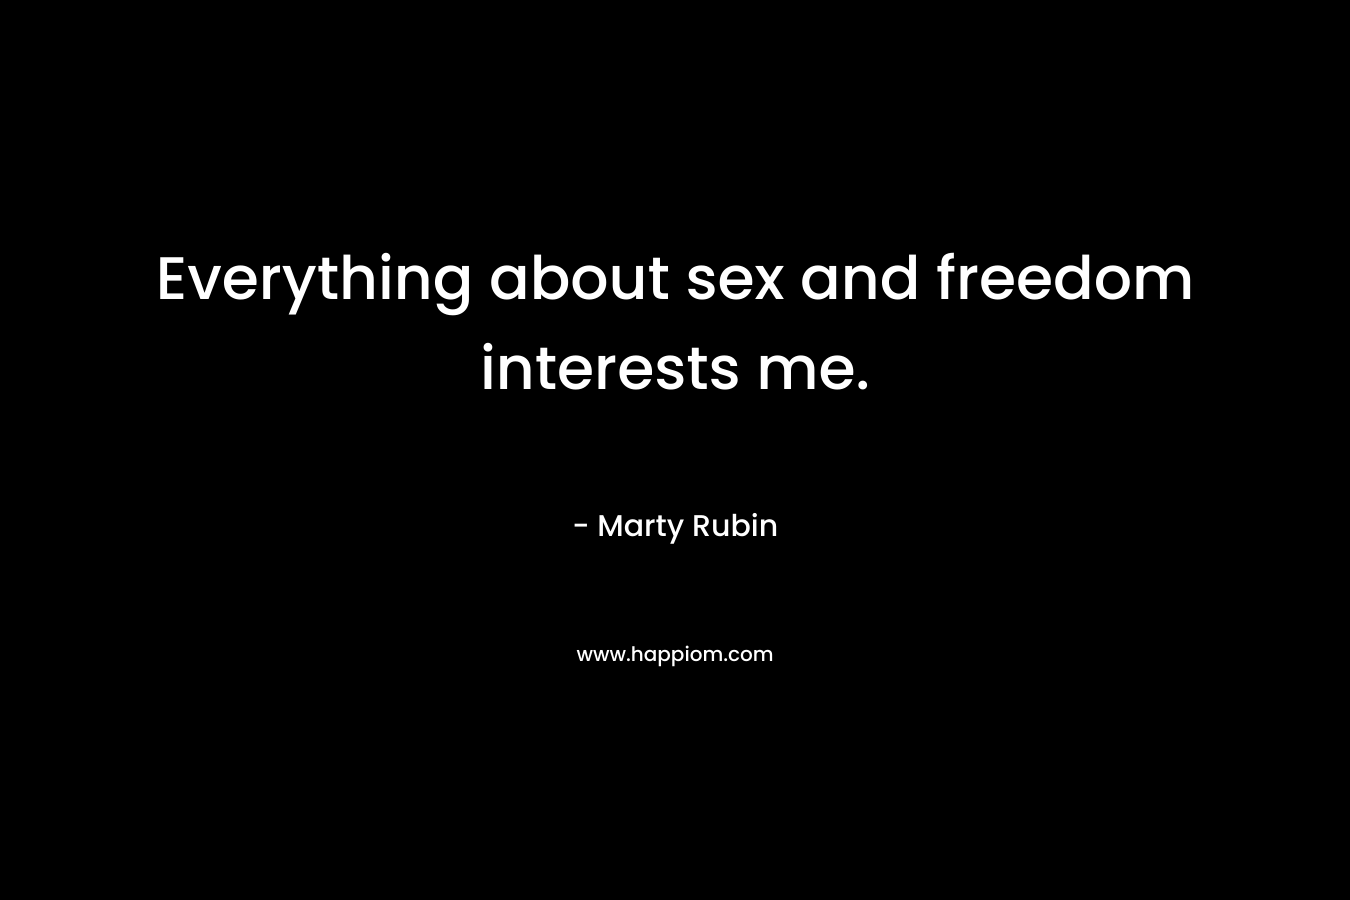 Everything about sex and freedom interests me.